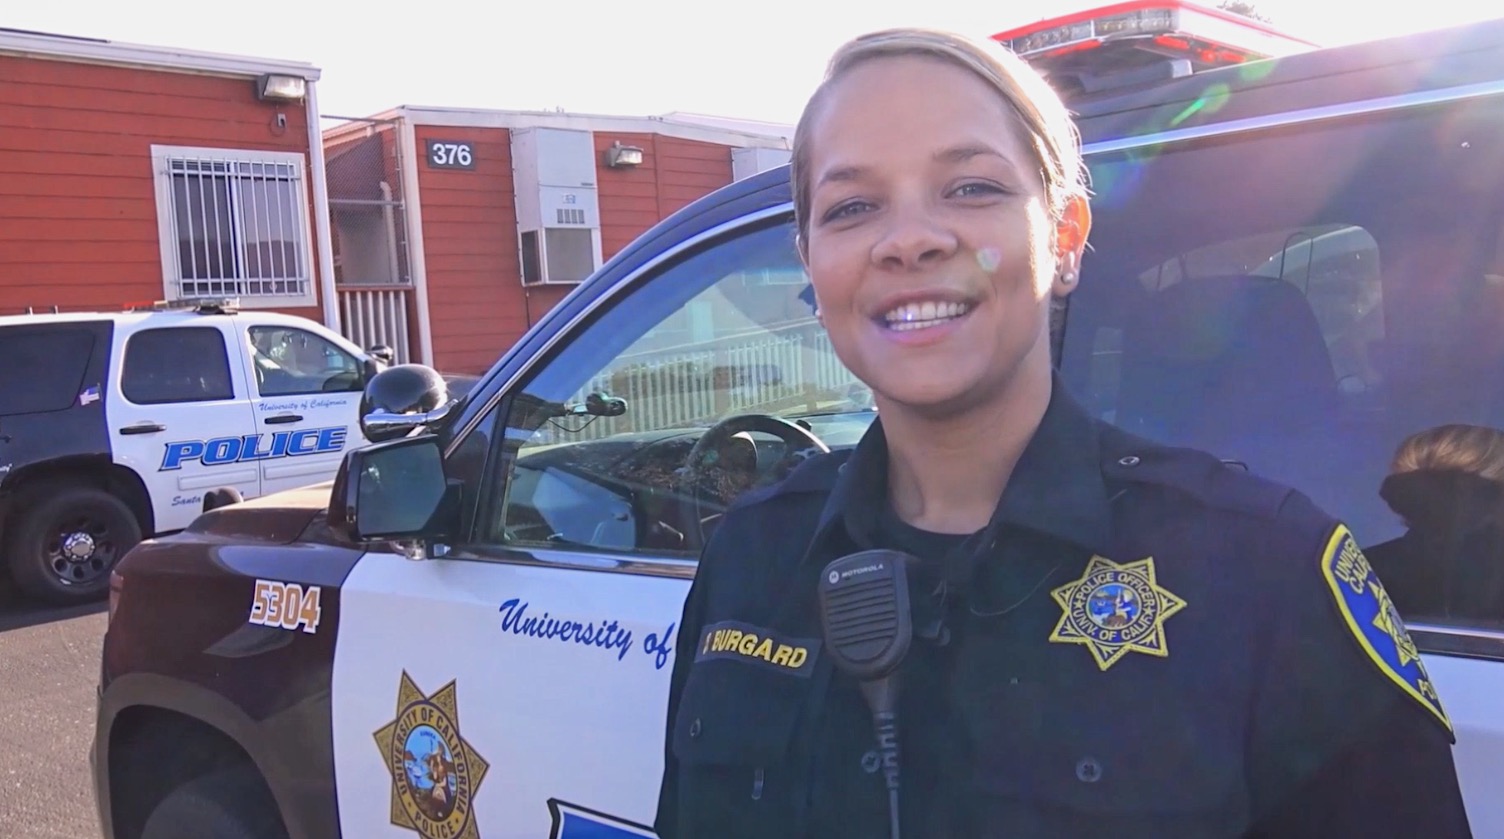 Officer Kiesow smiling in front of a UCPD patrol vehicle